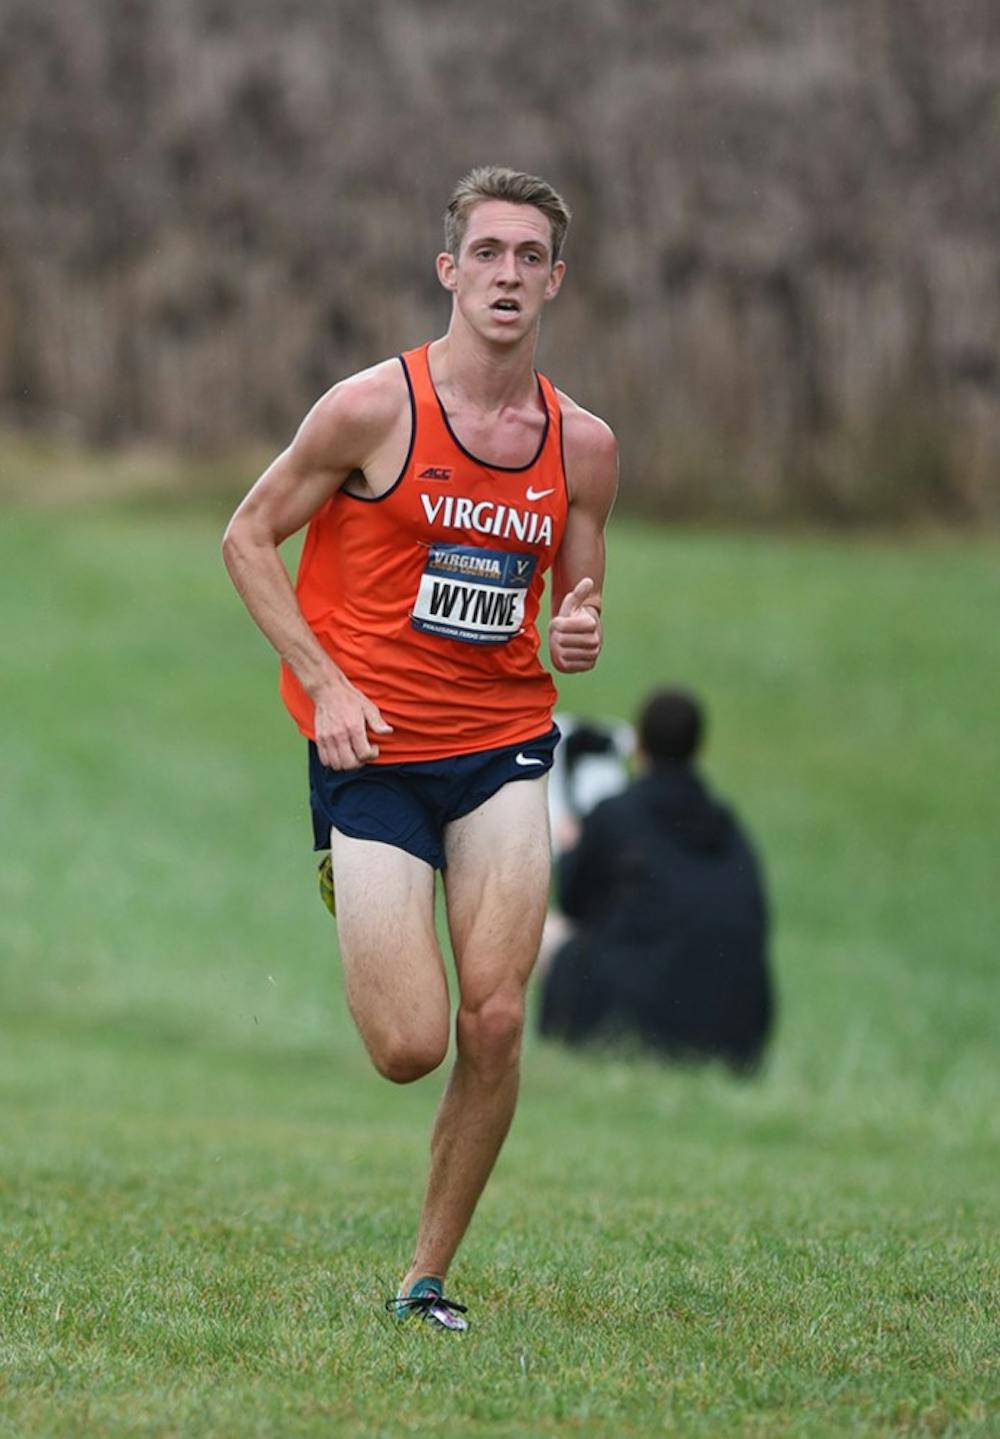 <p>Junior middle distance runner Henry Wynne became only the third Cavalier to post a sub-four minute mile, clocking in at&nbsp;3:58.74 in his fourth place finish.</p>